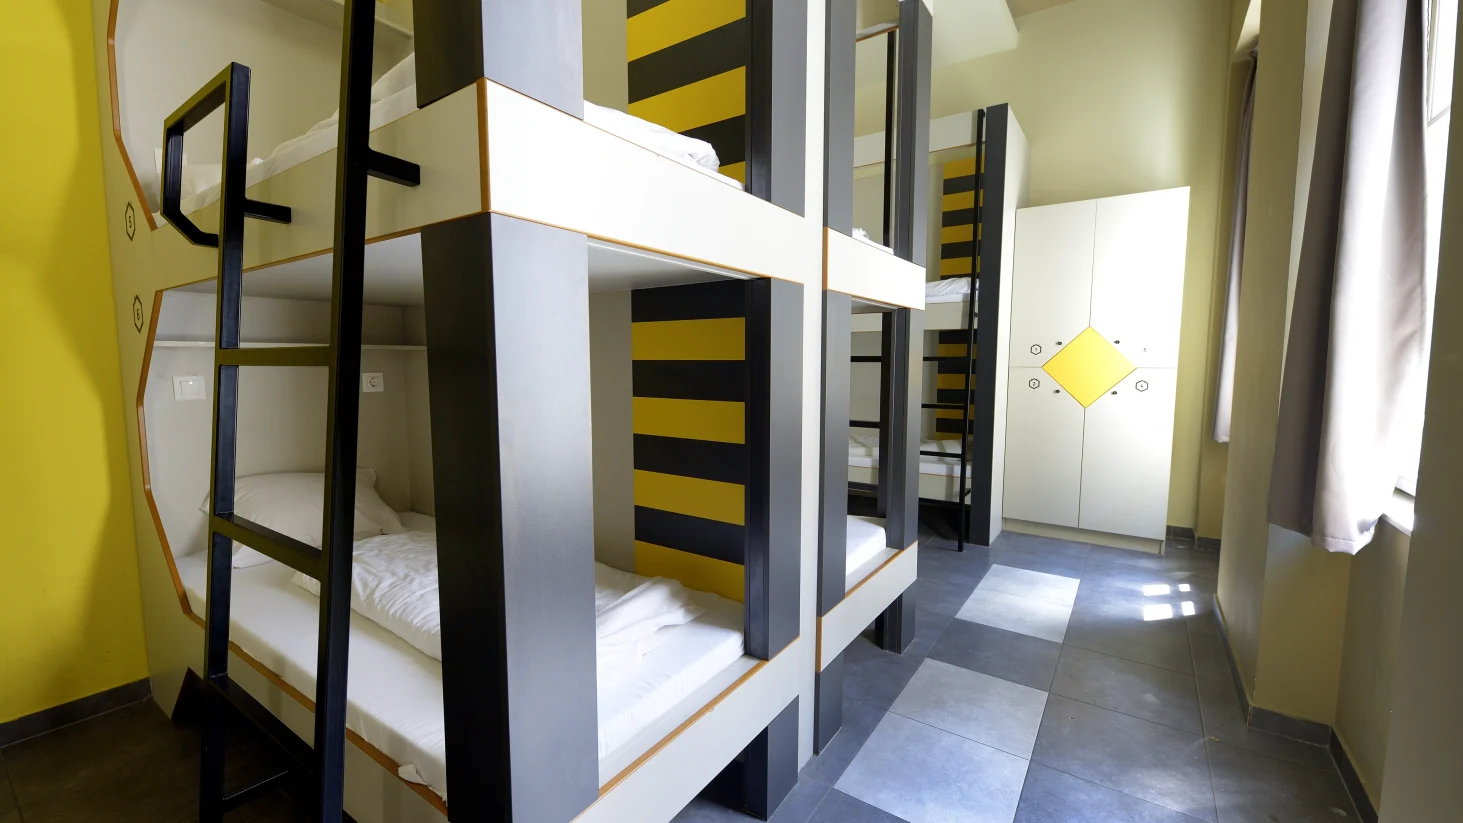 The Hive Party Hostel in Budapest